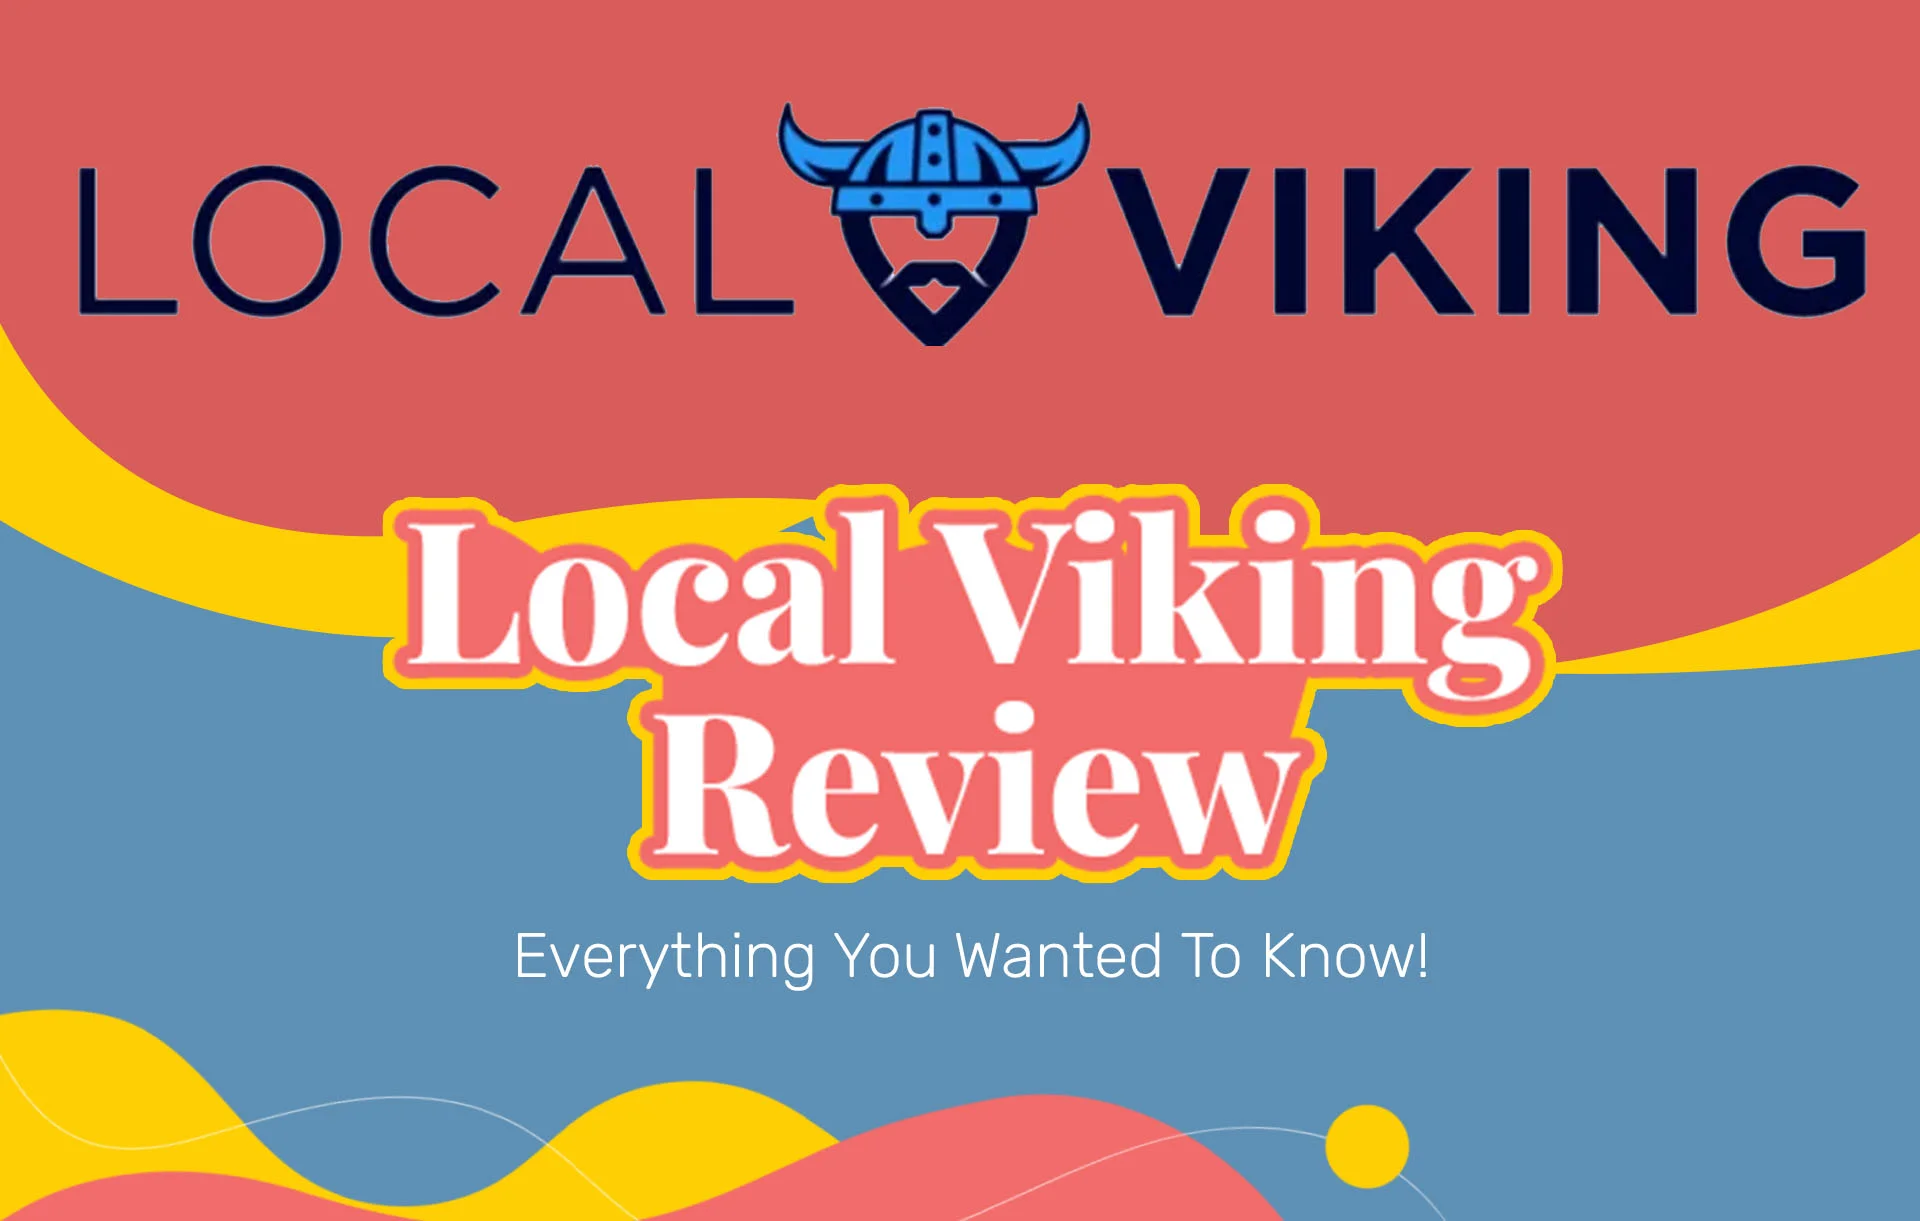 Local Viking Reviews: Best SEO Course?